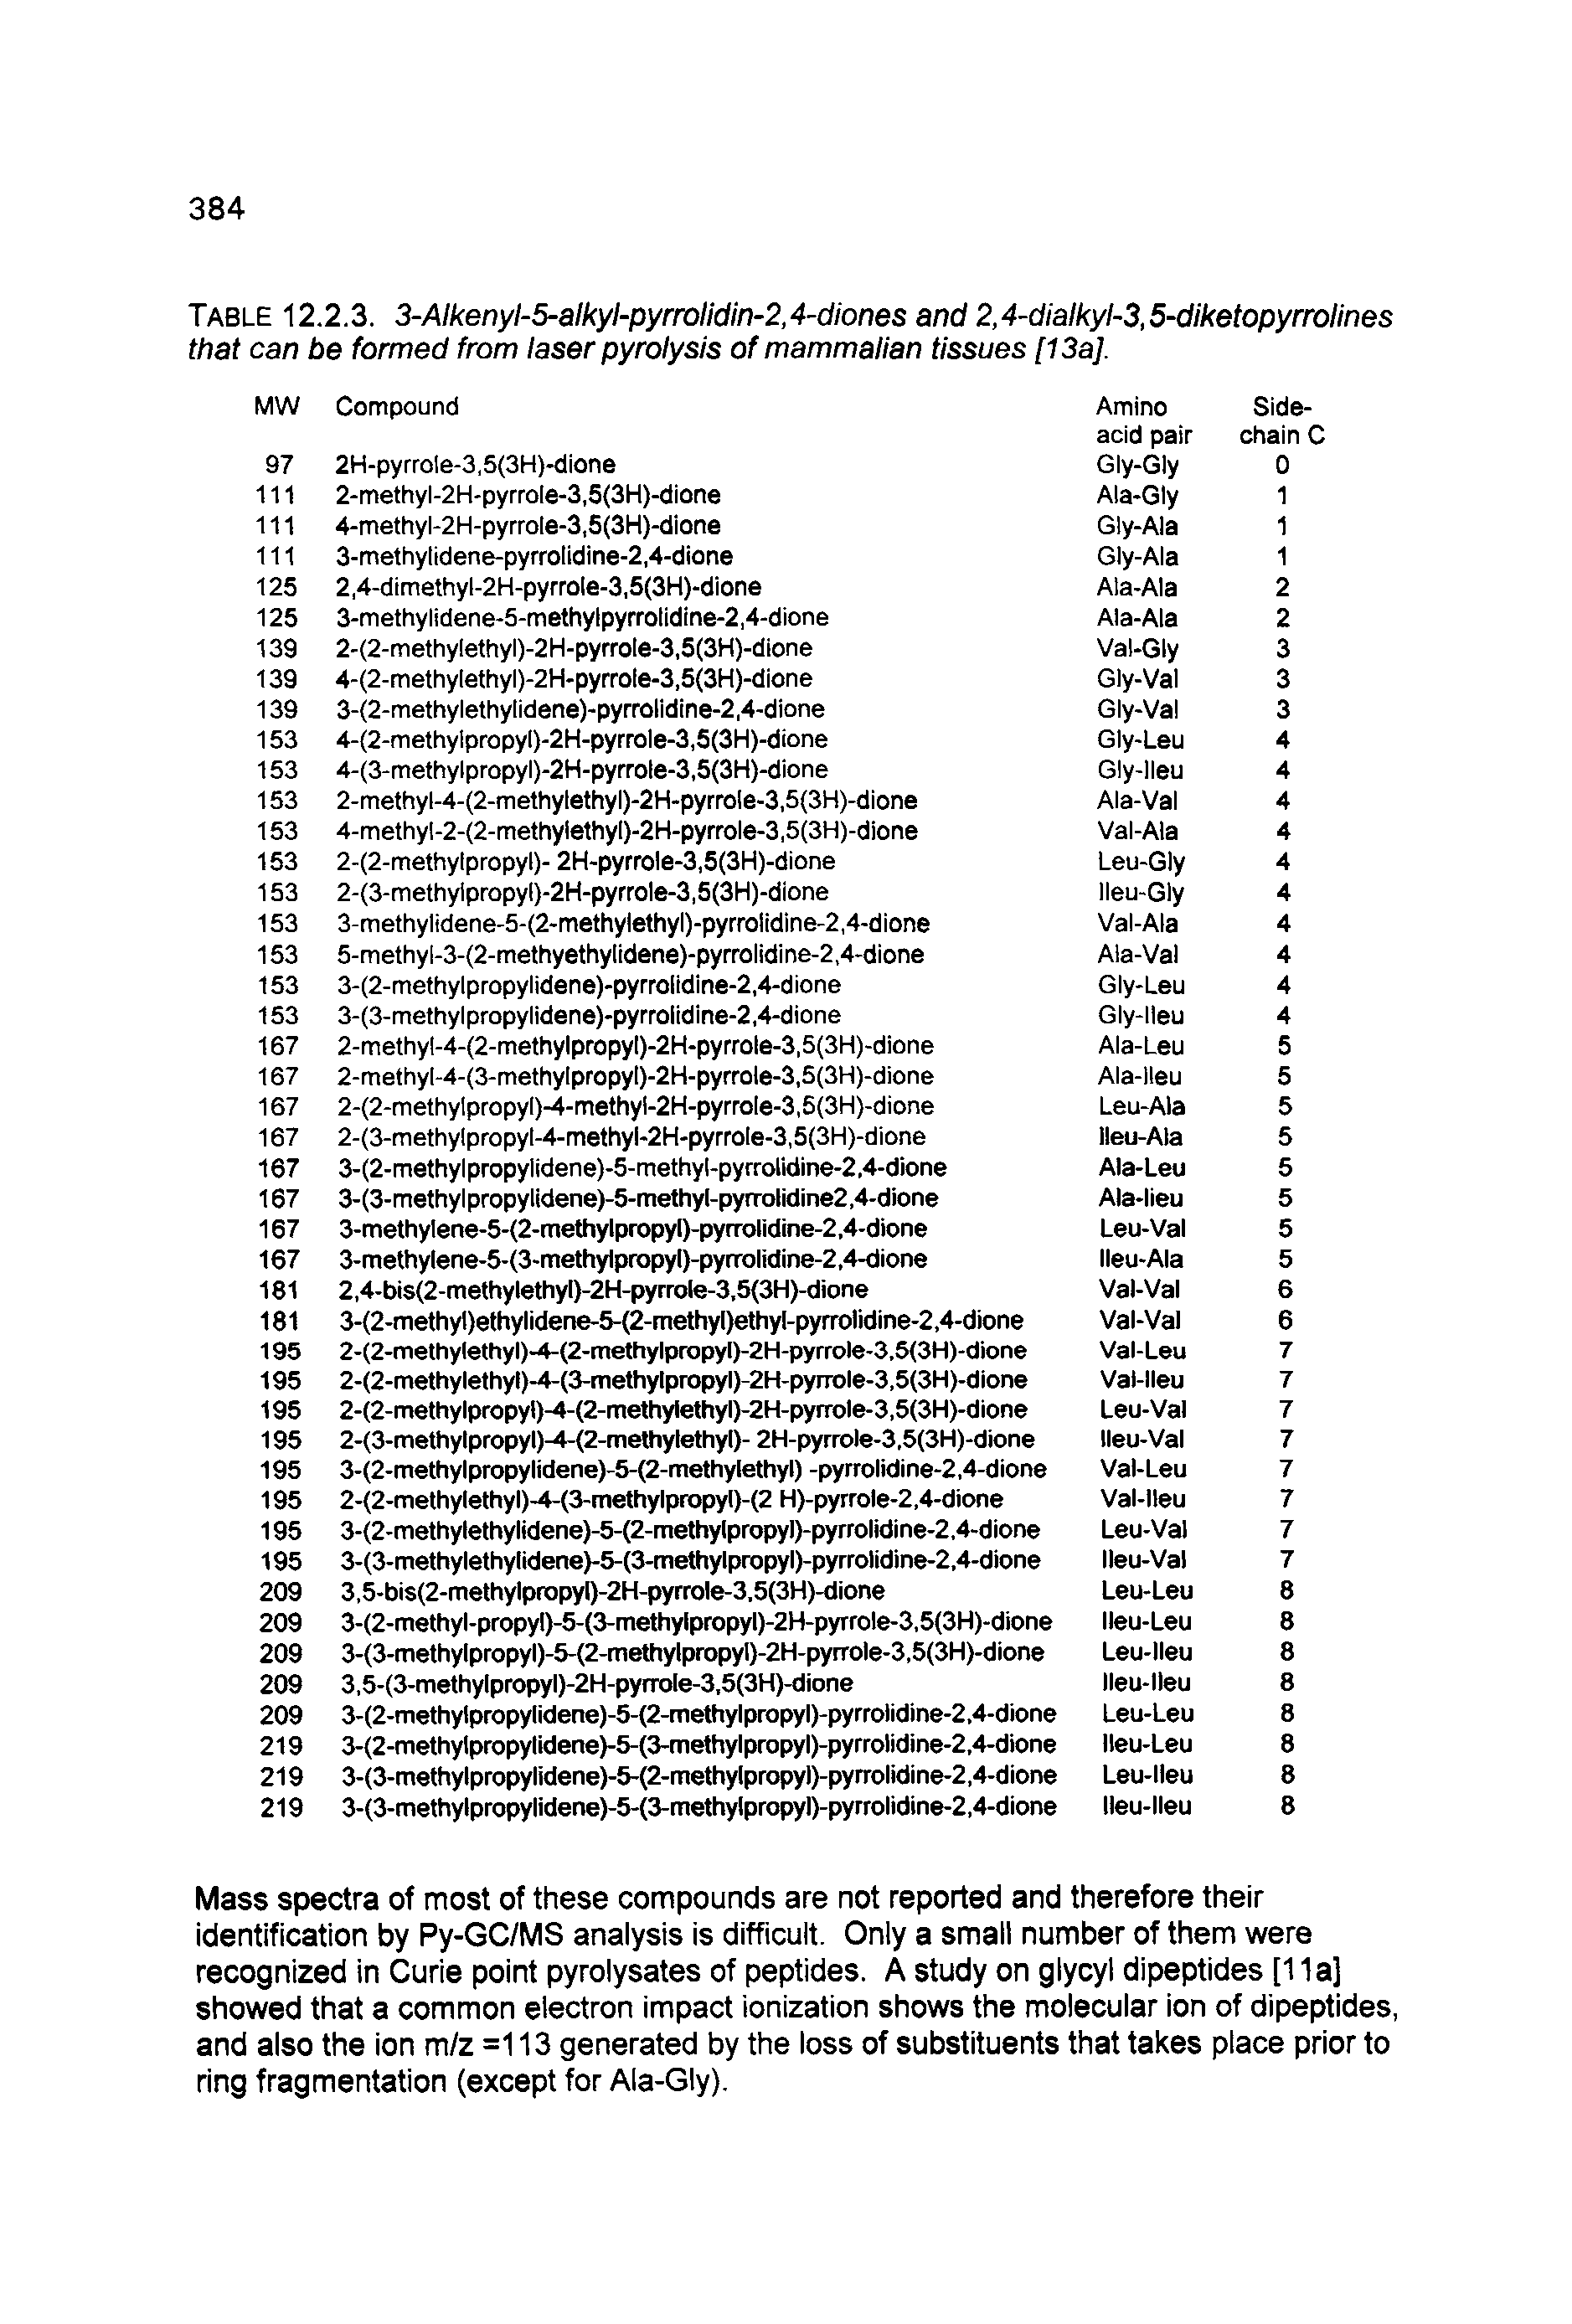 Table 12.2.3. 3-Alkenyl-5-alkyl-pyrrolidin-2,4-diones and 2,4-dialkyl-3,5-diketopyrrolines that can be formed from laser pyrolysis of mammalian tissues [13a].